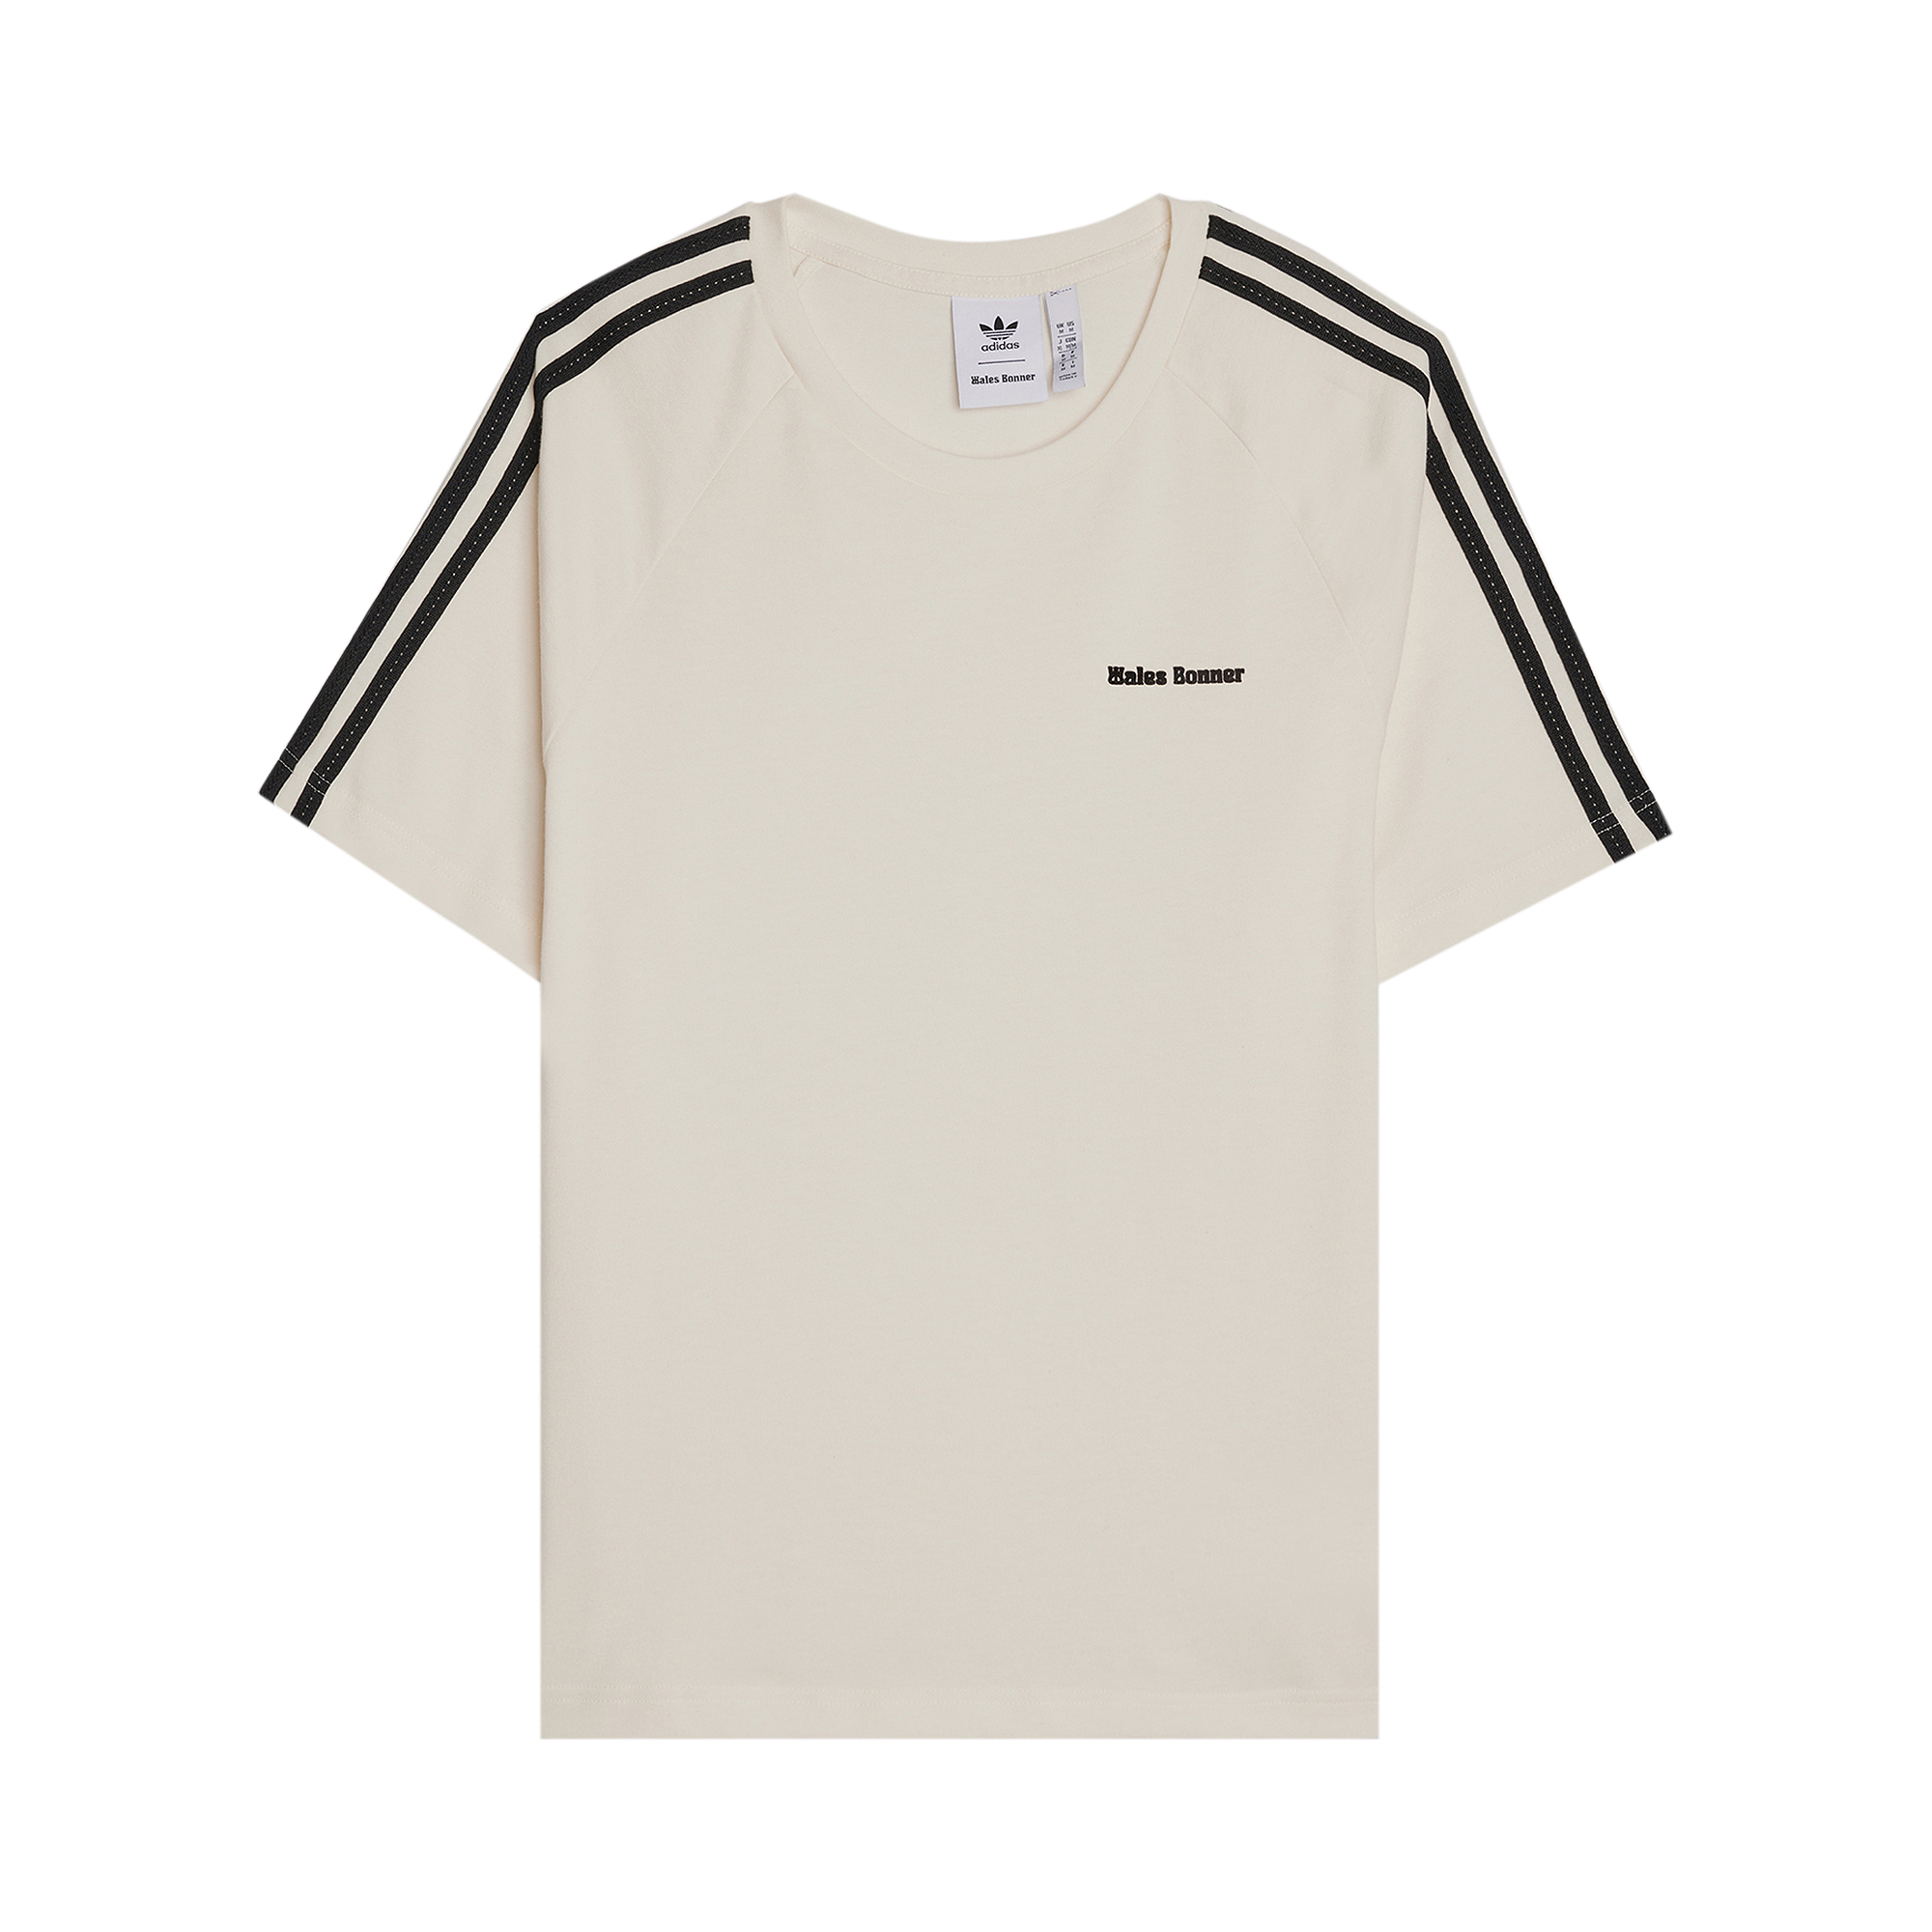 Pre-owned Adidas Originals Adidas X Wales Bonner Short-sleeve Tee 'white'